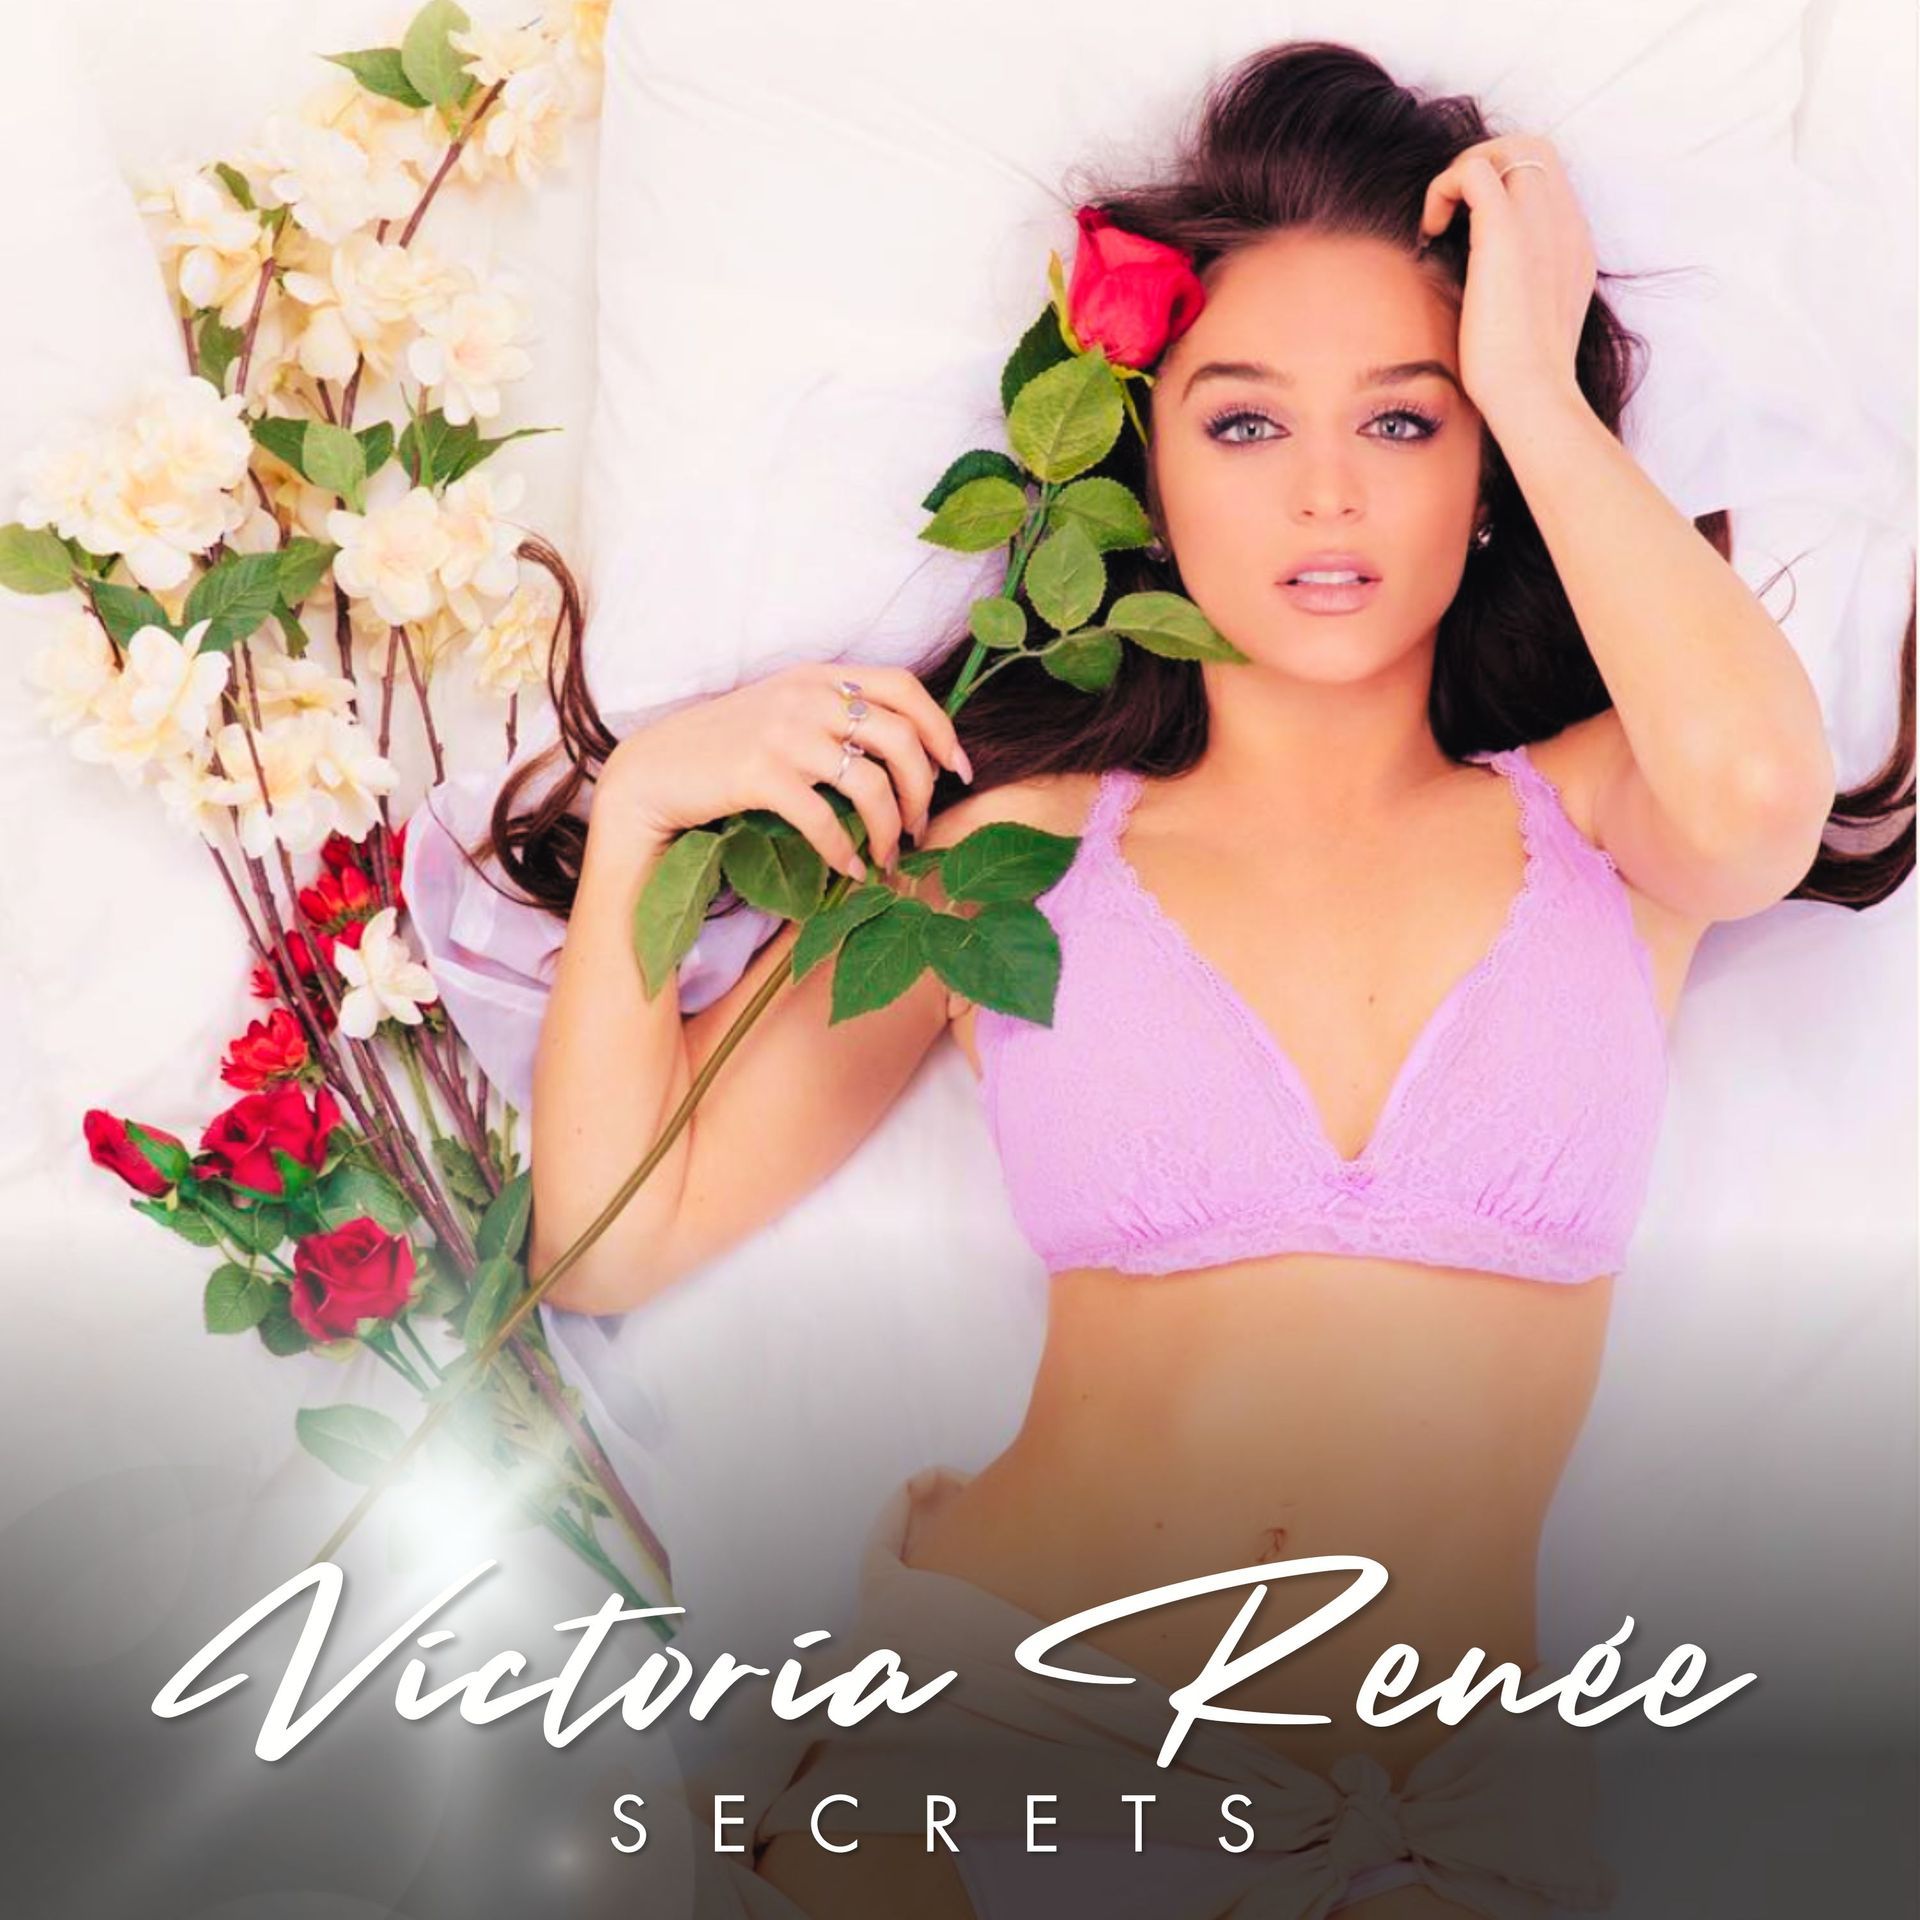 Victoria renee is laying on a bed holding a rose